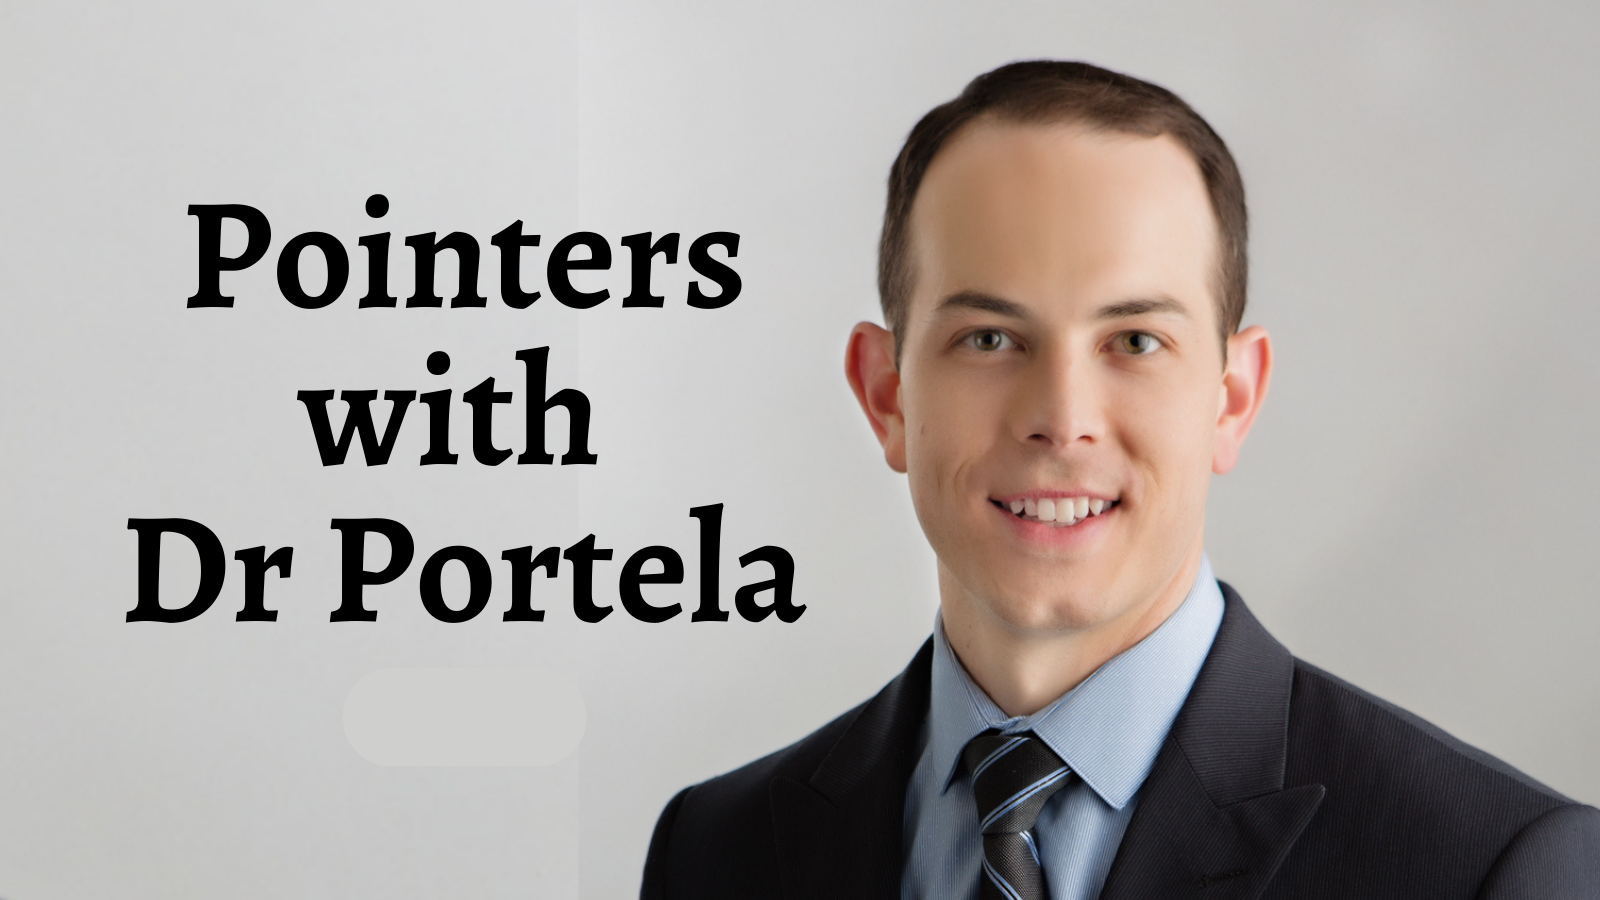  Pointers With Dr Portela: How to Get Rid of Brown Spots